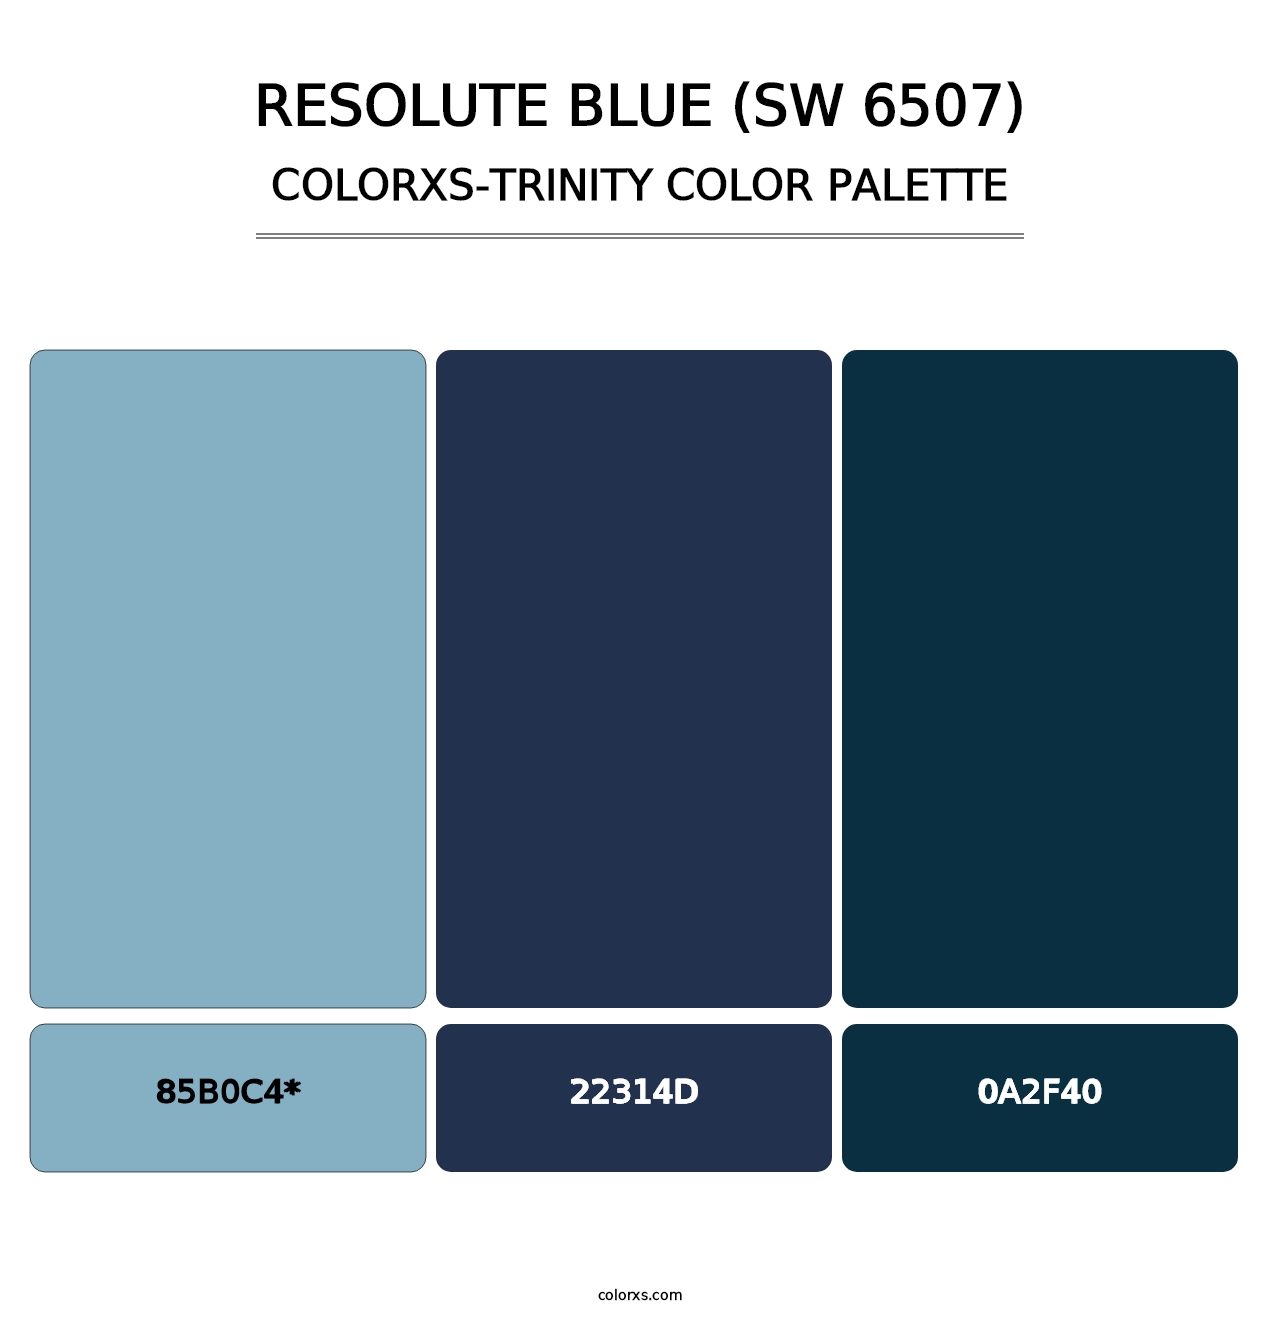 Resolute Blue (SW 6507) - Colorxs Trinity Palette